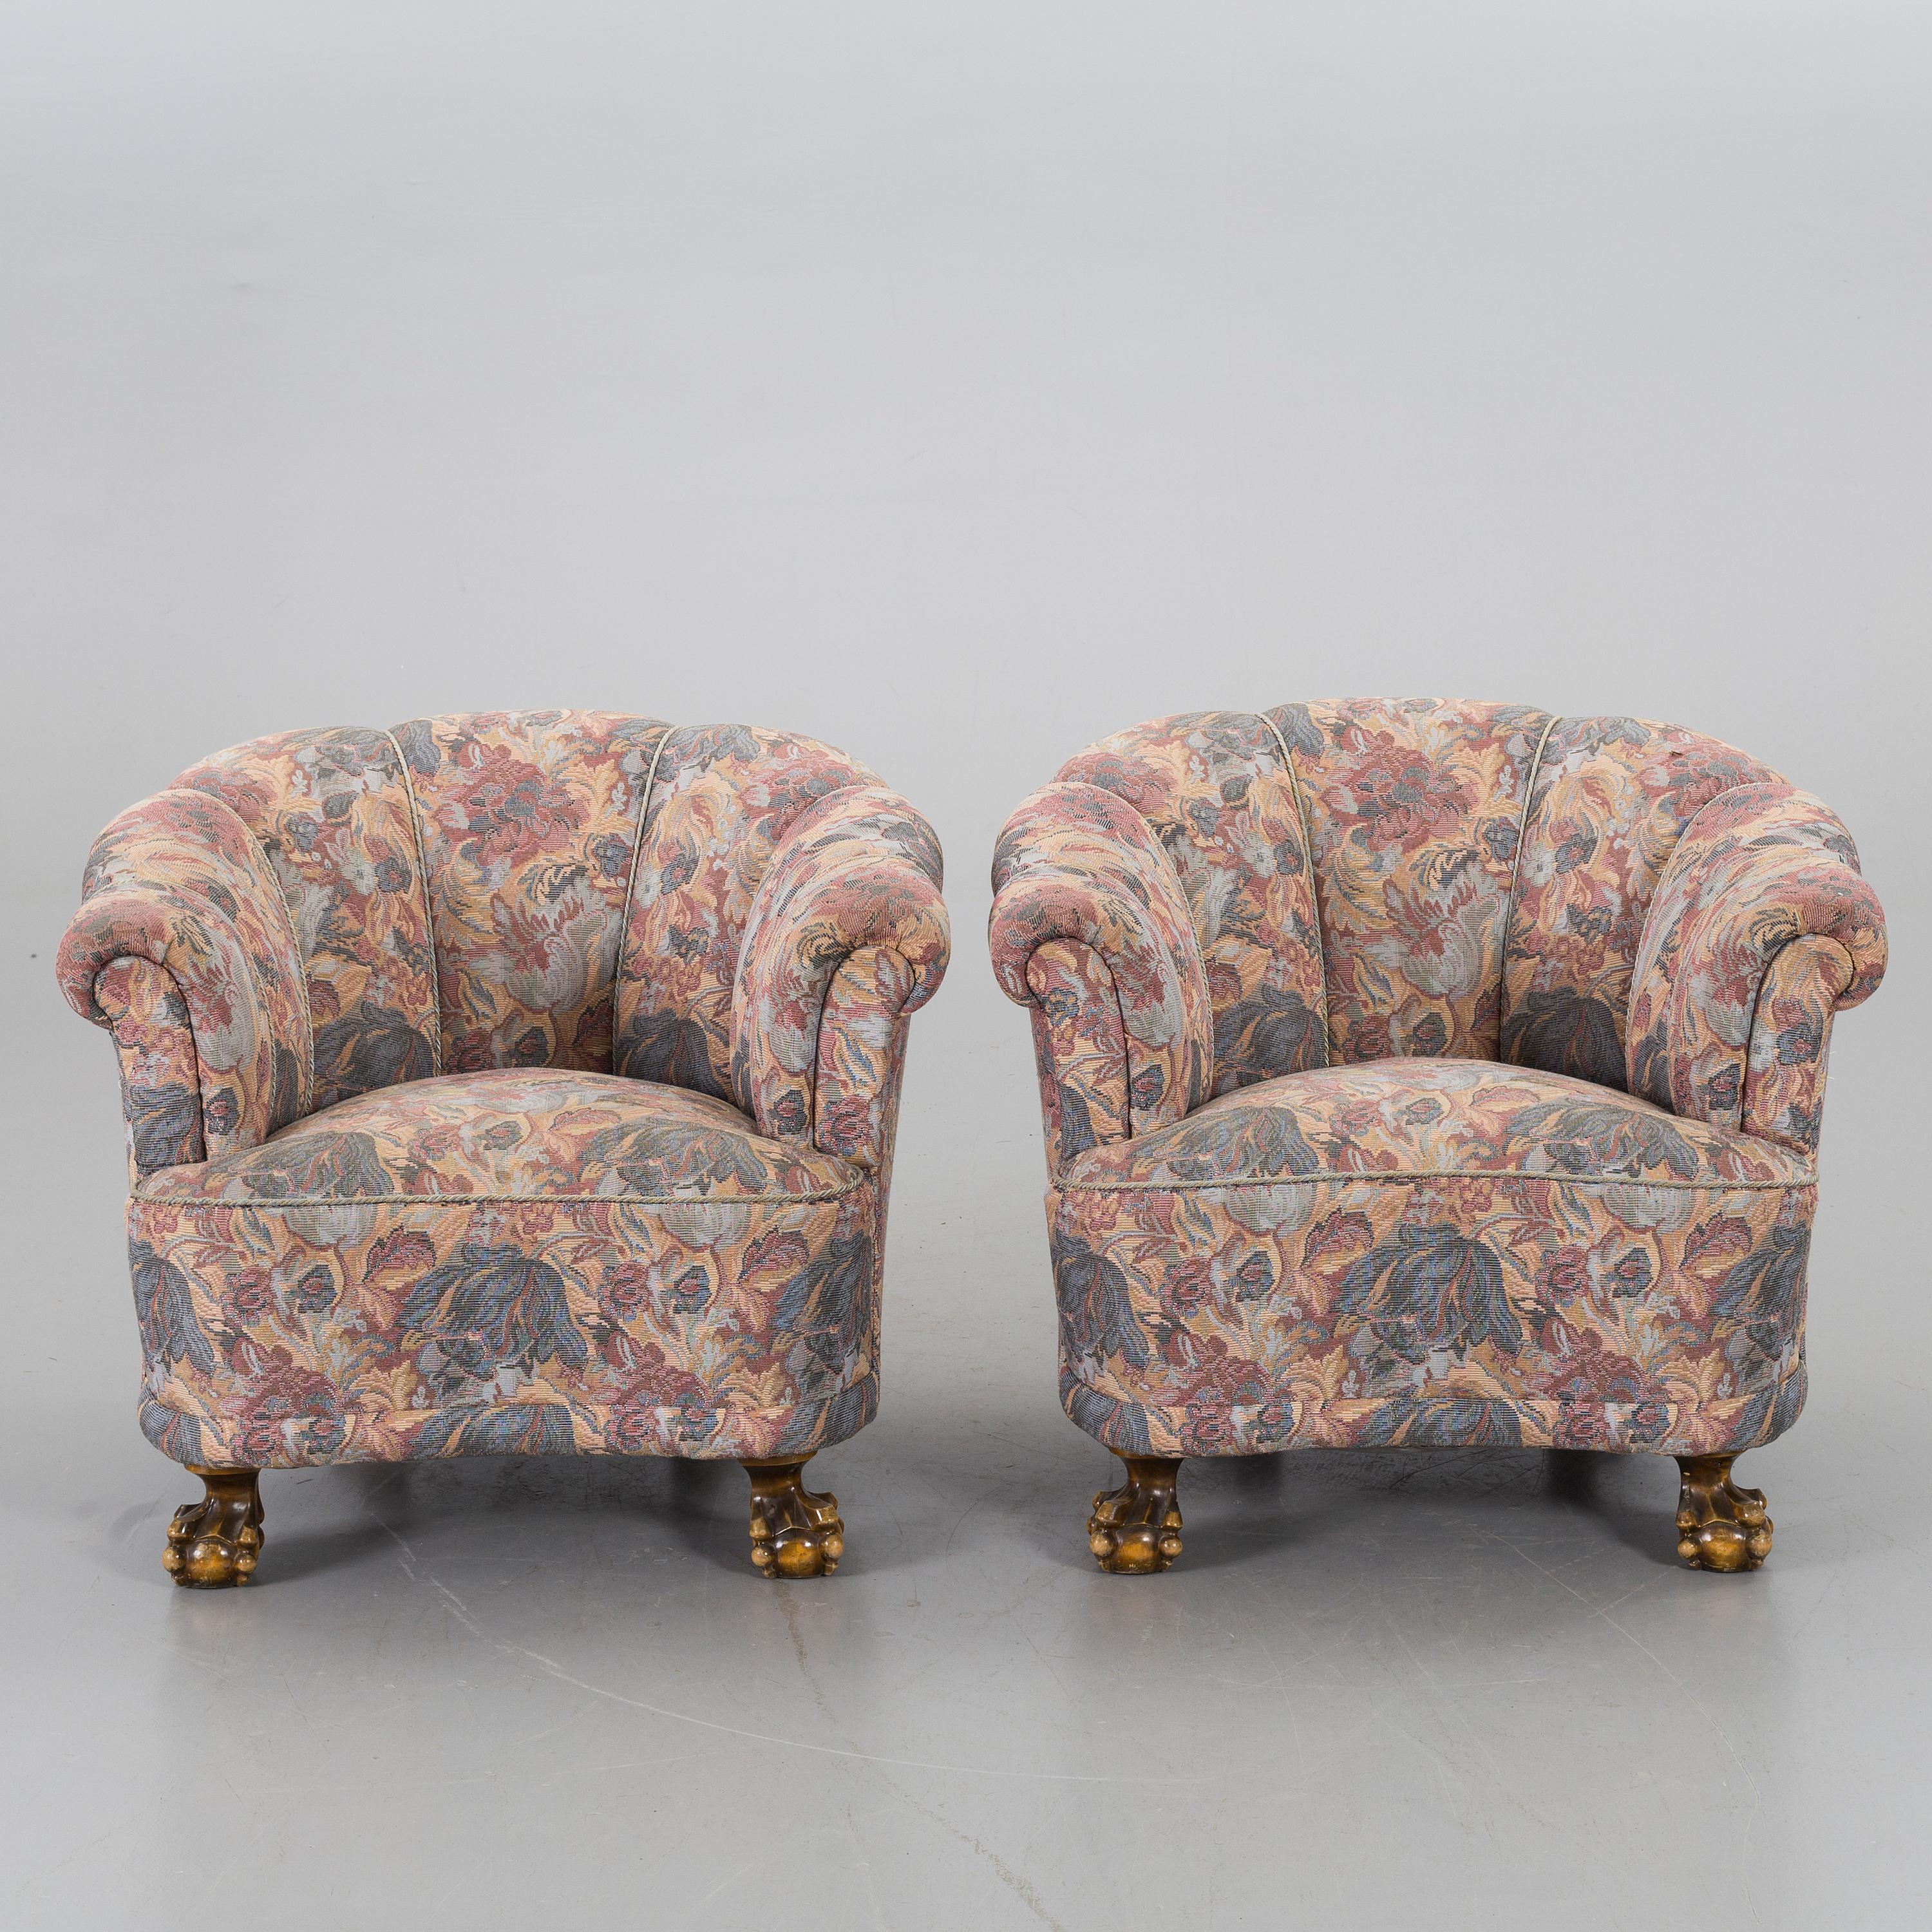 Pair of Scandinavian Modern lounge chairs with channelled backs, deep and comfortable from 1930s with
very expressive paw feet, hand carved in beech in original rose and pale blue upholstery fabric.